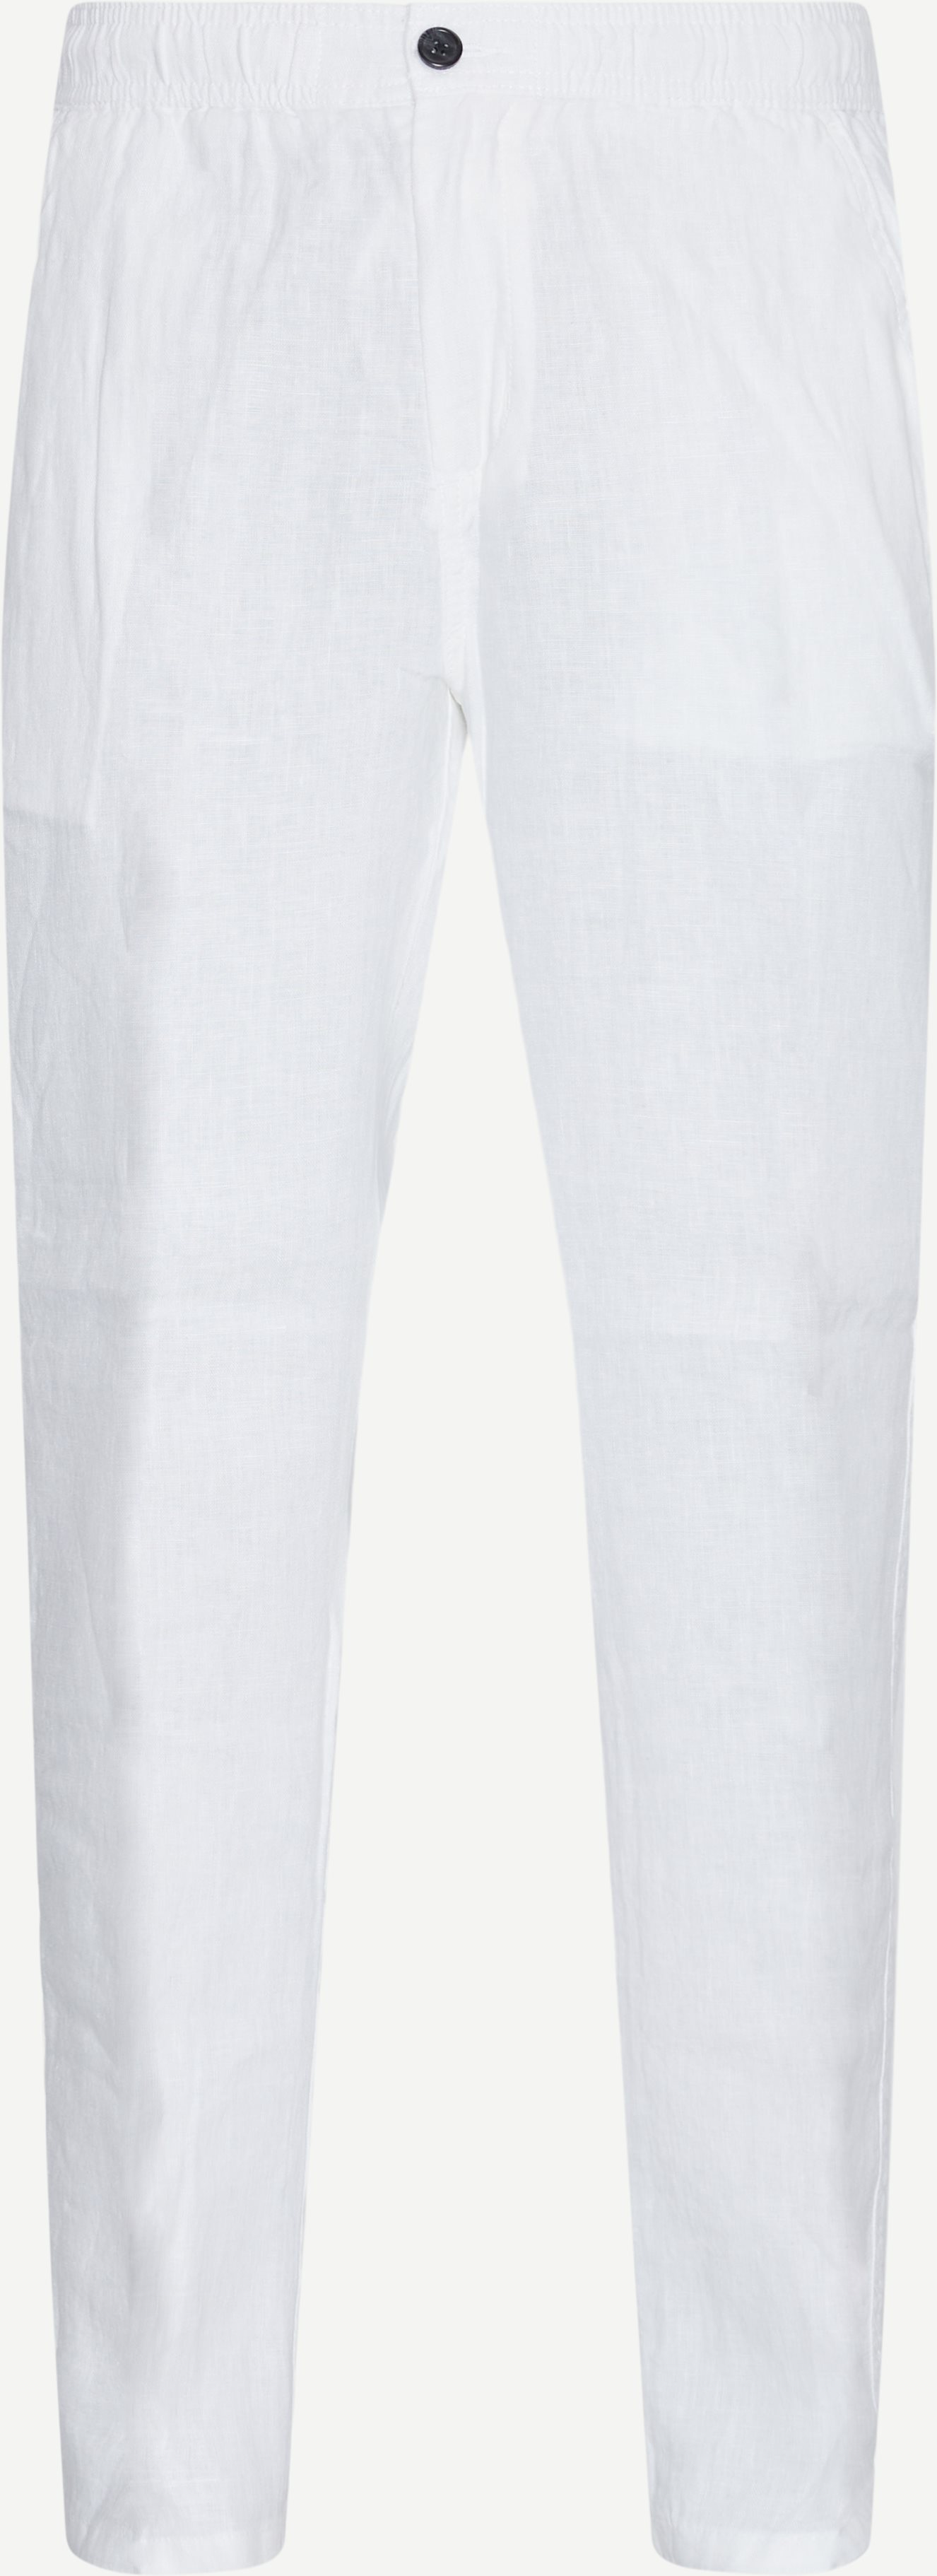 ICELAND Trousers BANDERAS White